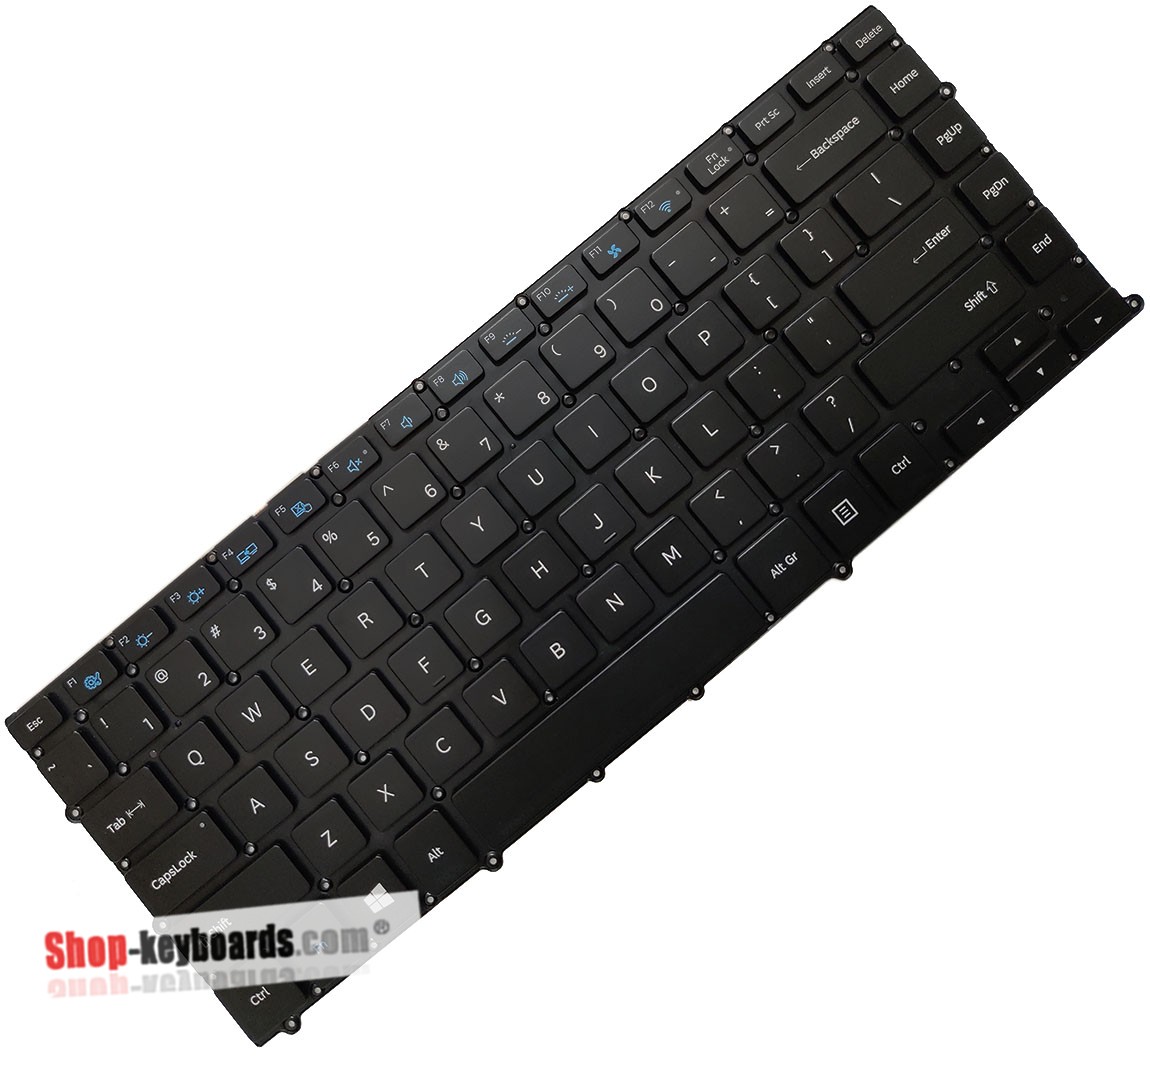 Samsung NT900X4D-K01CA  Keyboard replacement